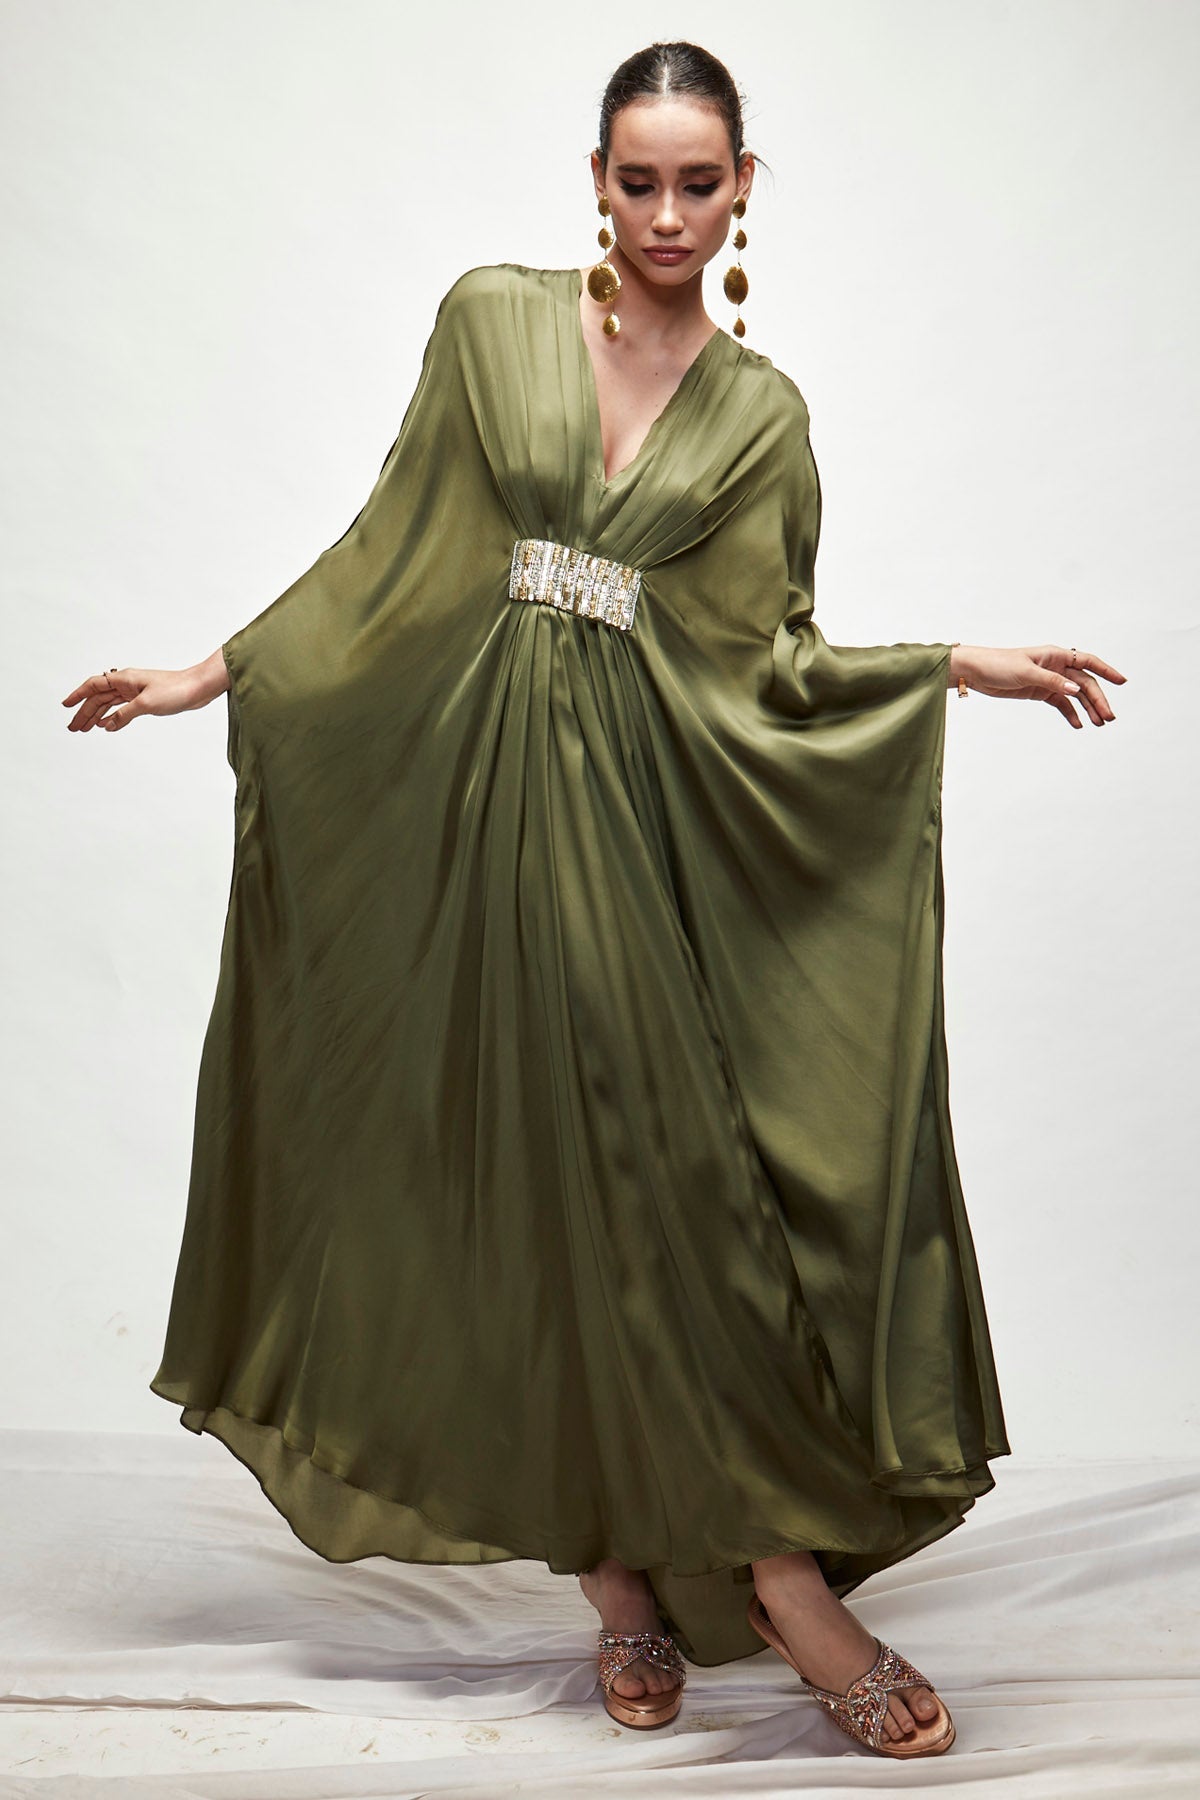 Designer Ranian Olive green silk kaftan with front pleat detailing and beads embroidery For women Online at ScrollnShops